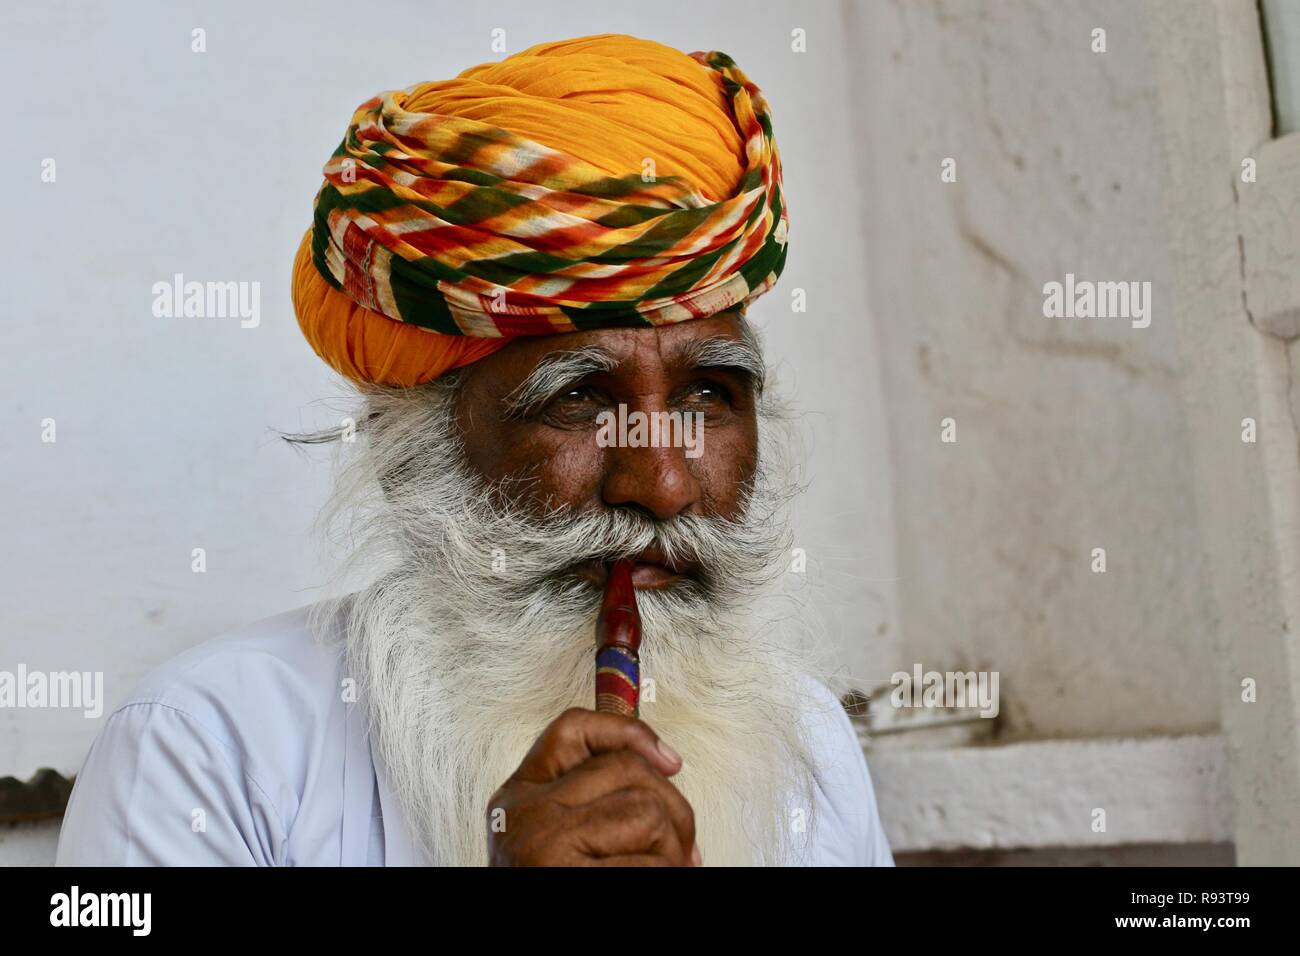 An Indian man in white with orange and yellow turban Stock Photo